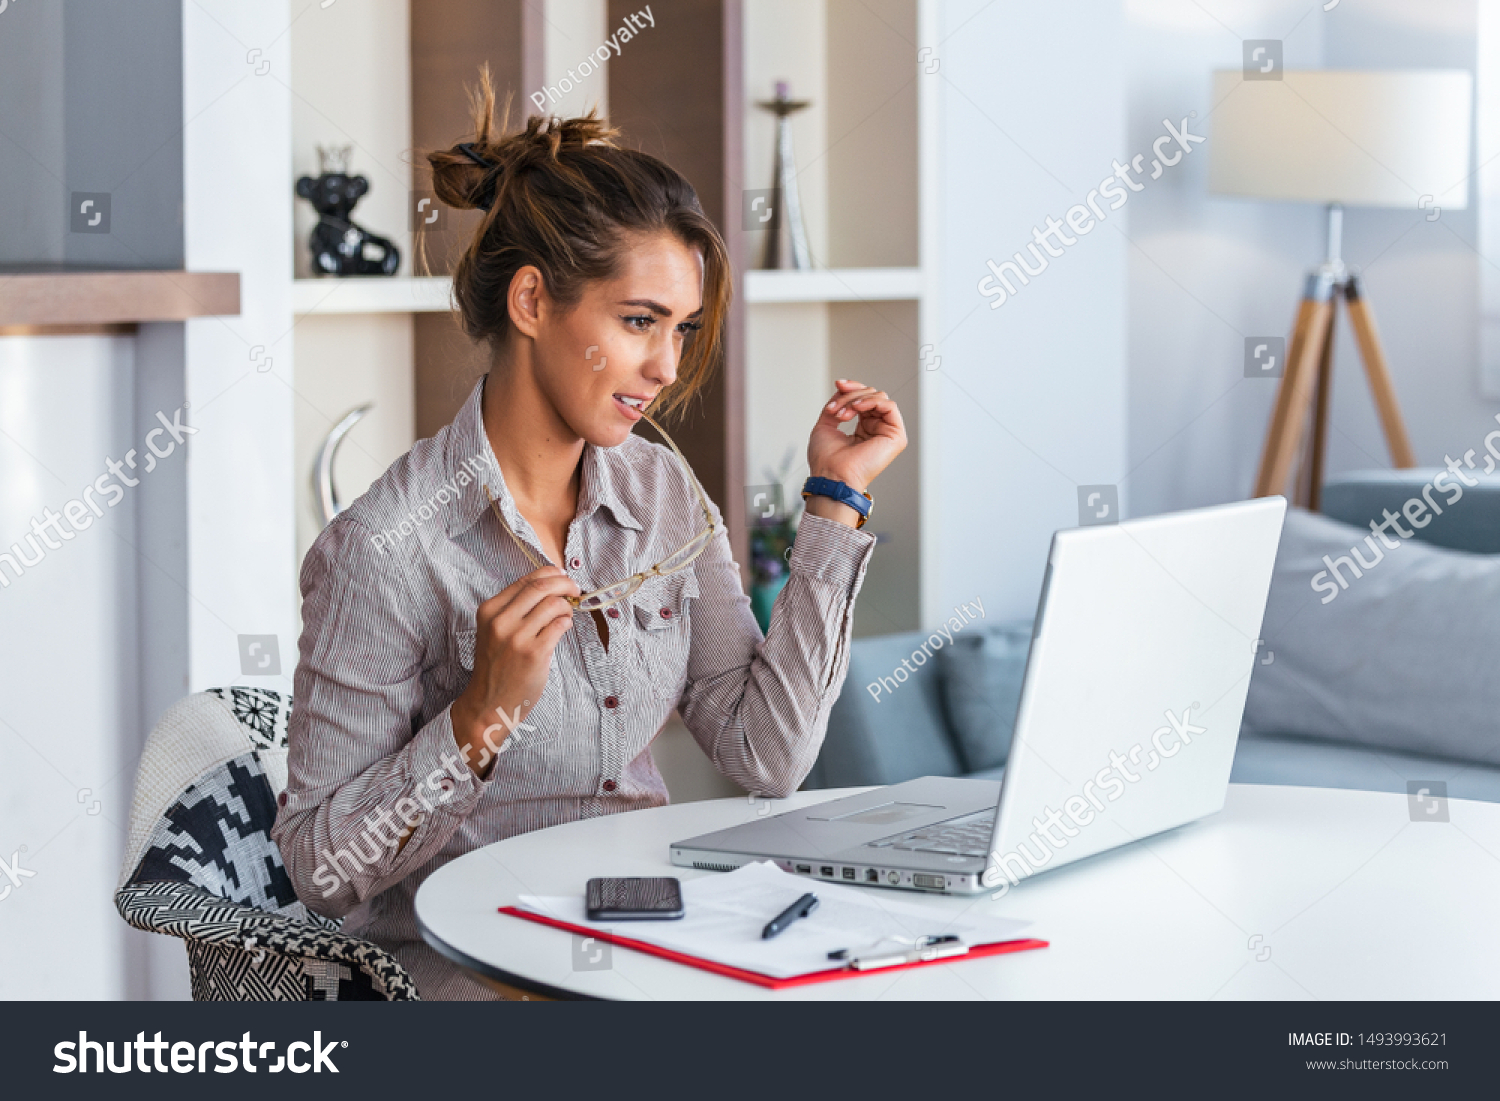 Young business woman biting eyeglasses and looking at her laptop. #1493993621